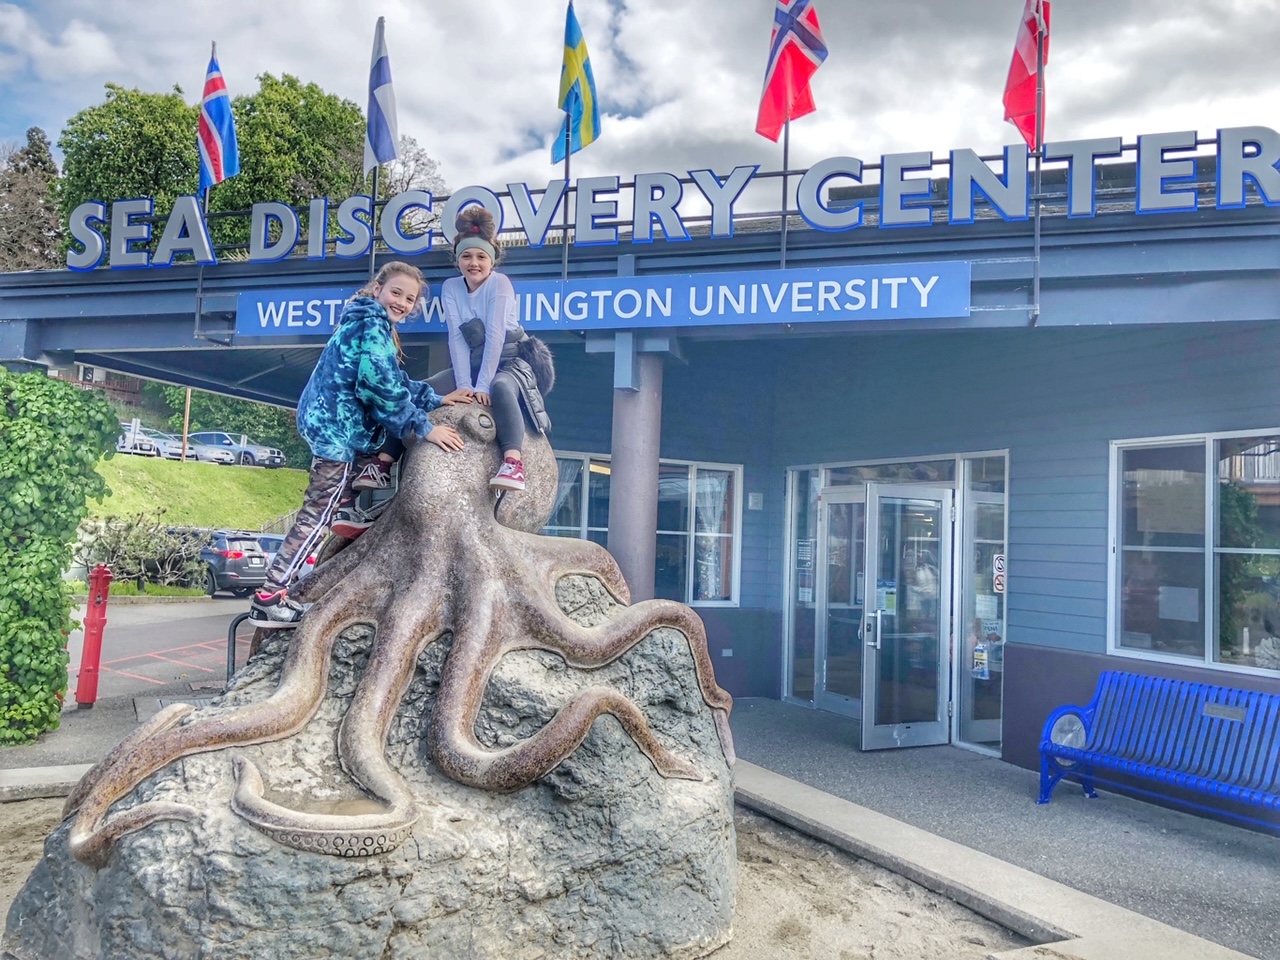 Sea Discovery Center in Poulsbo